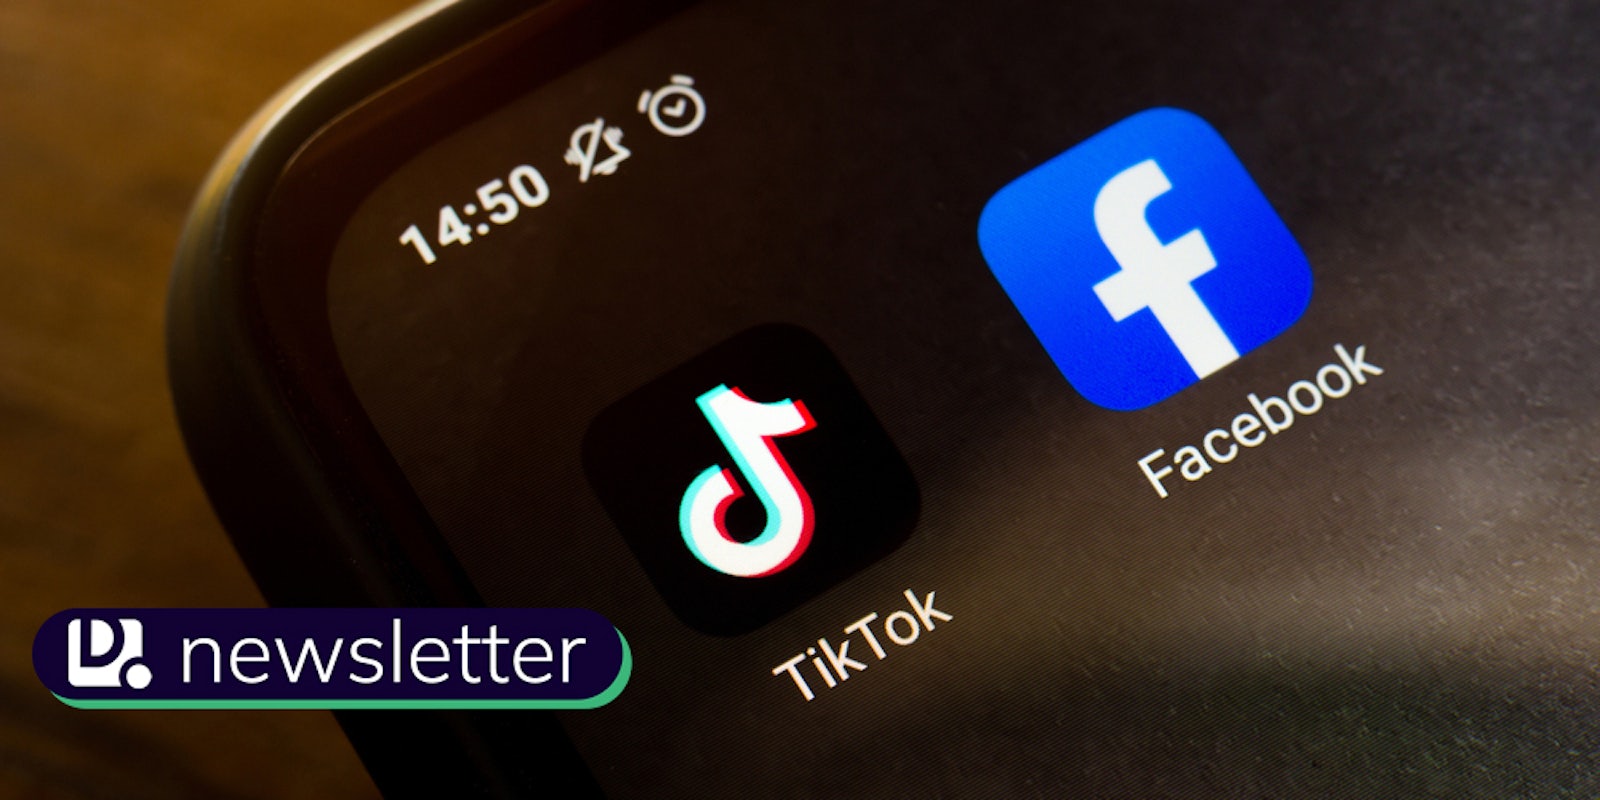 A TikTok app and Facebook app on a smartphone screen. The Daily Dot newsletter logo is in the bottom left corner.